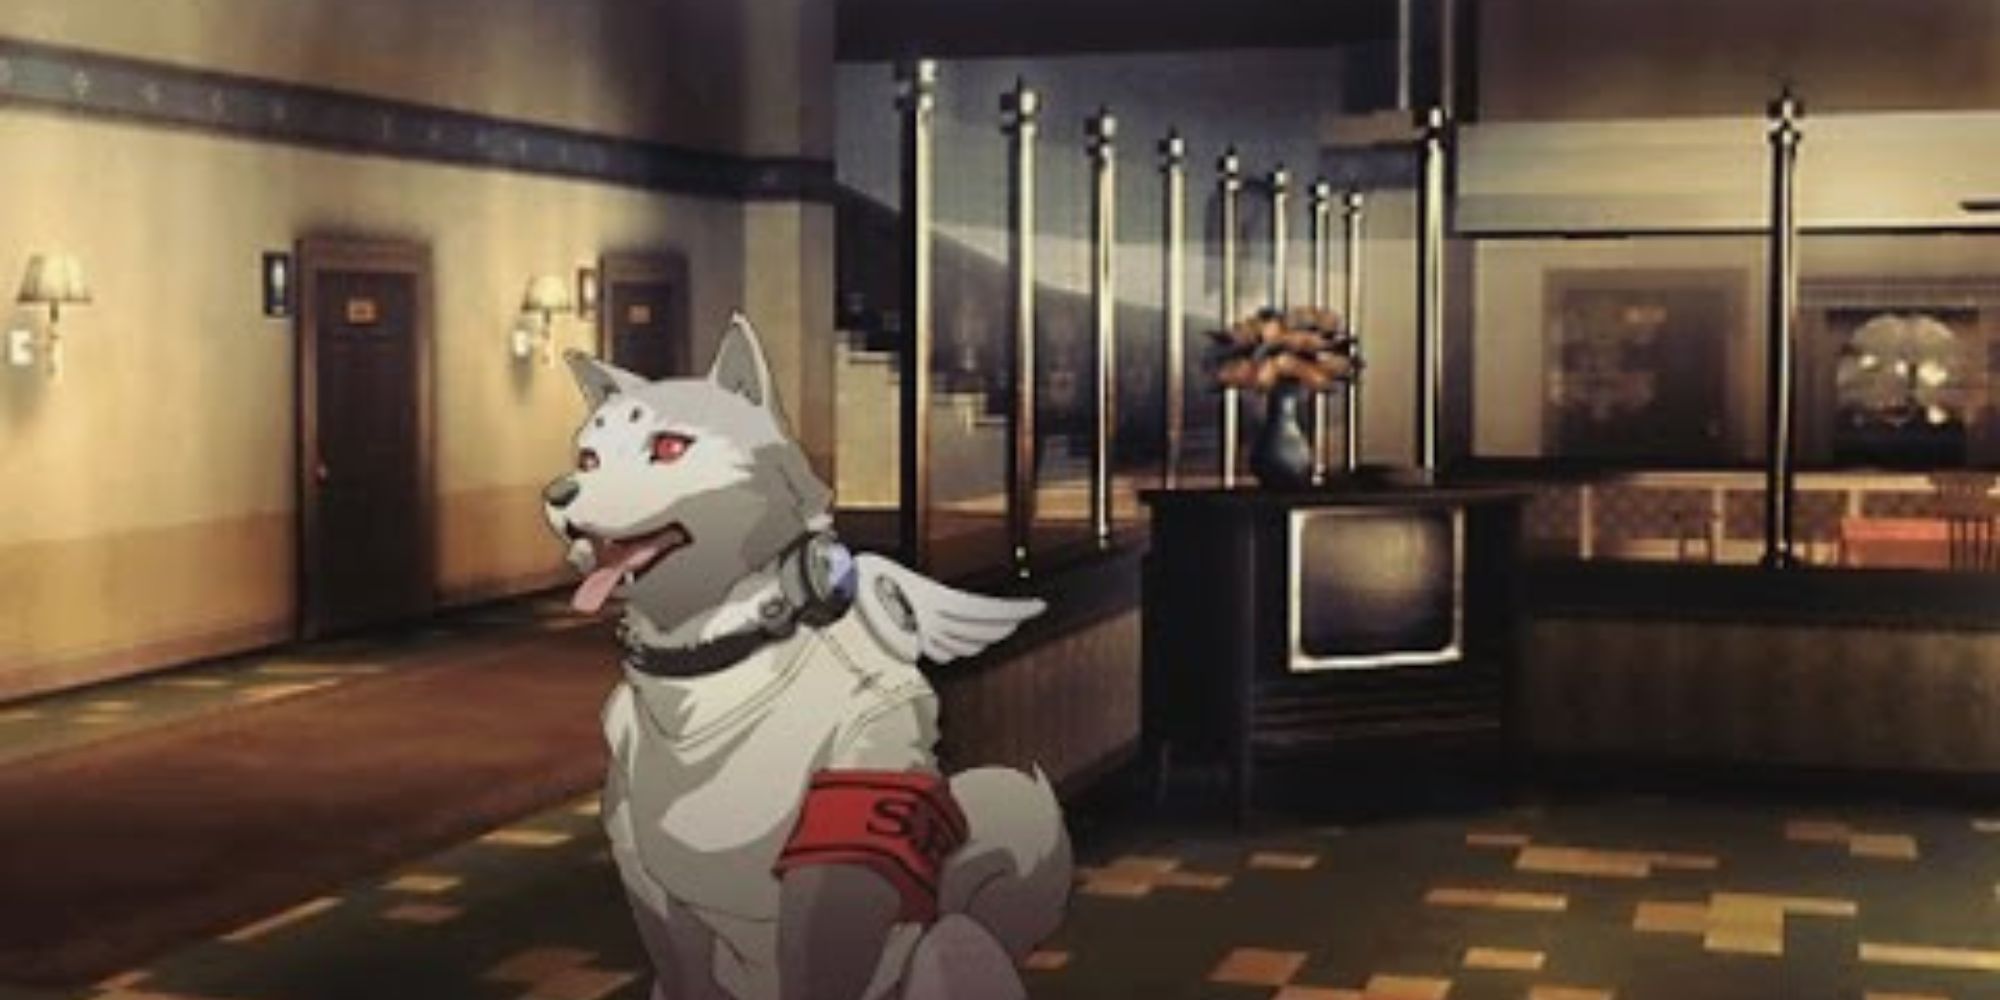 Koromaru sitting in a room with a TV, Vase of flowers and doors. Might be a hotel